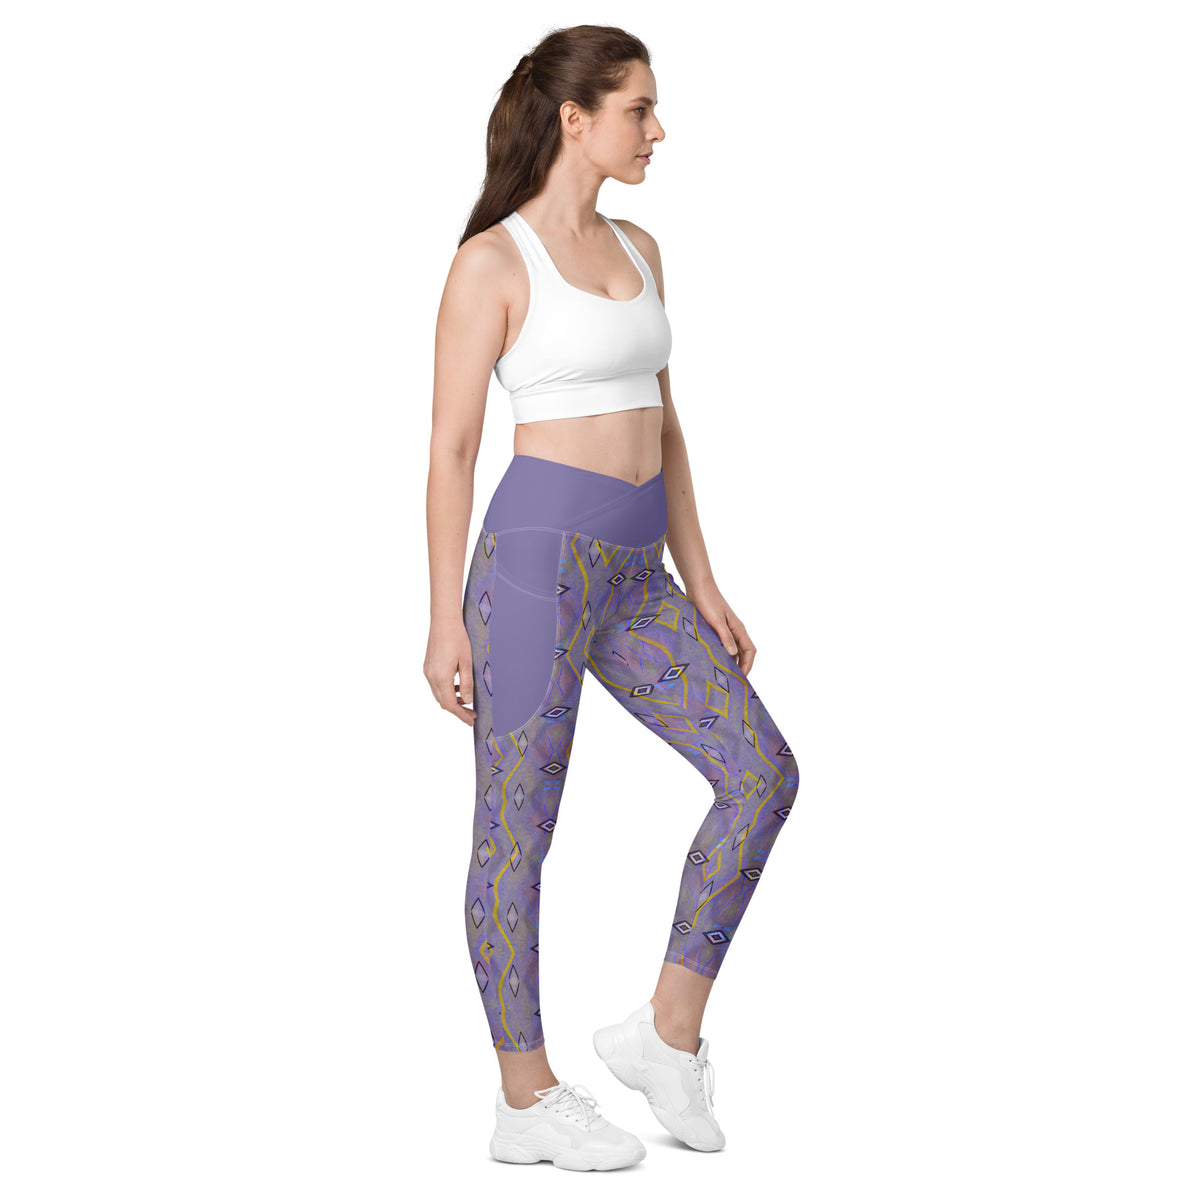 Embracing a cosmic workout in the Cosmic Fusion Tristar Crossover Leggings.